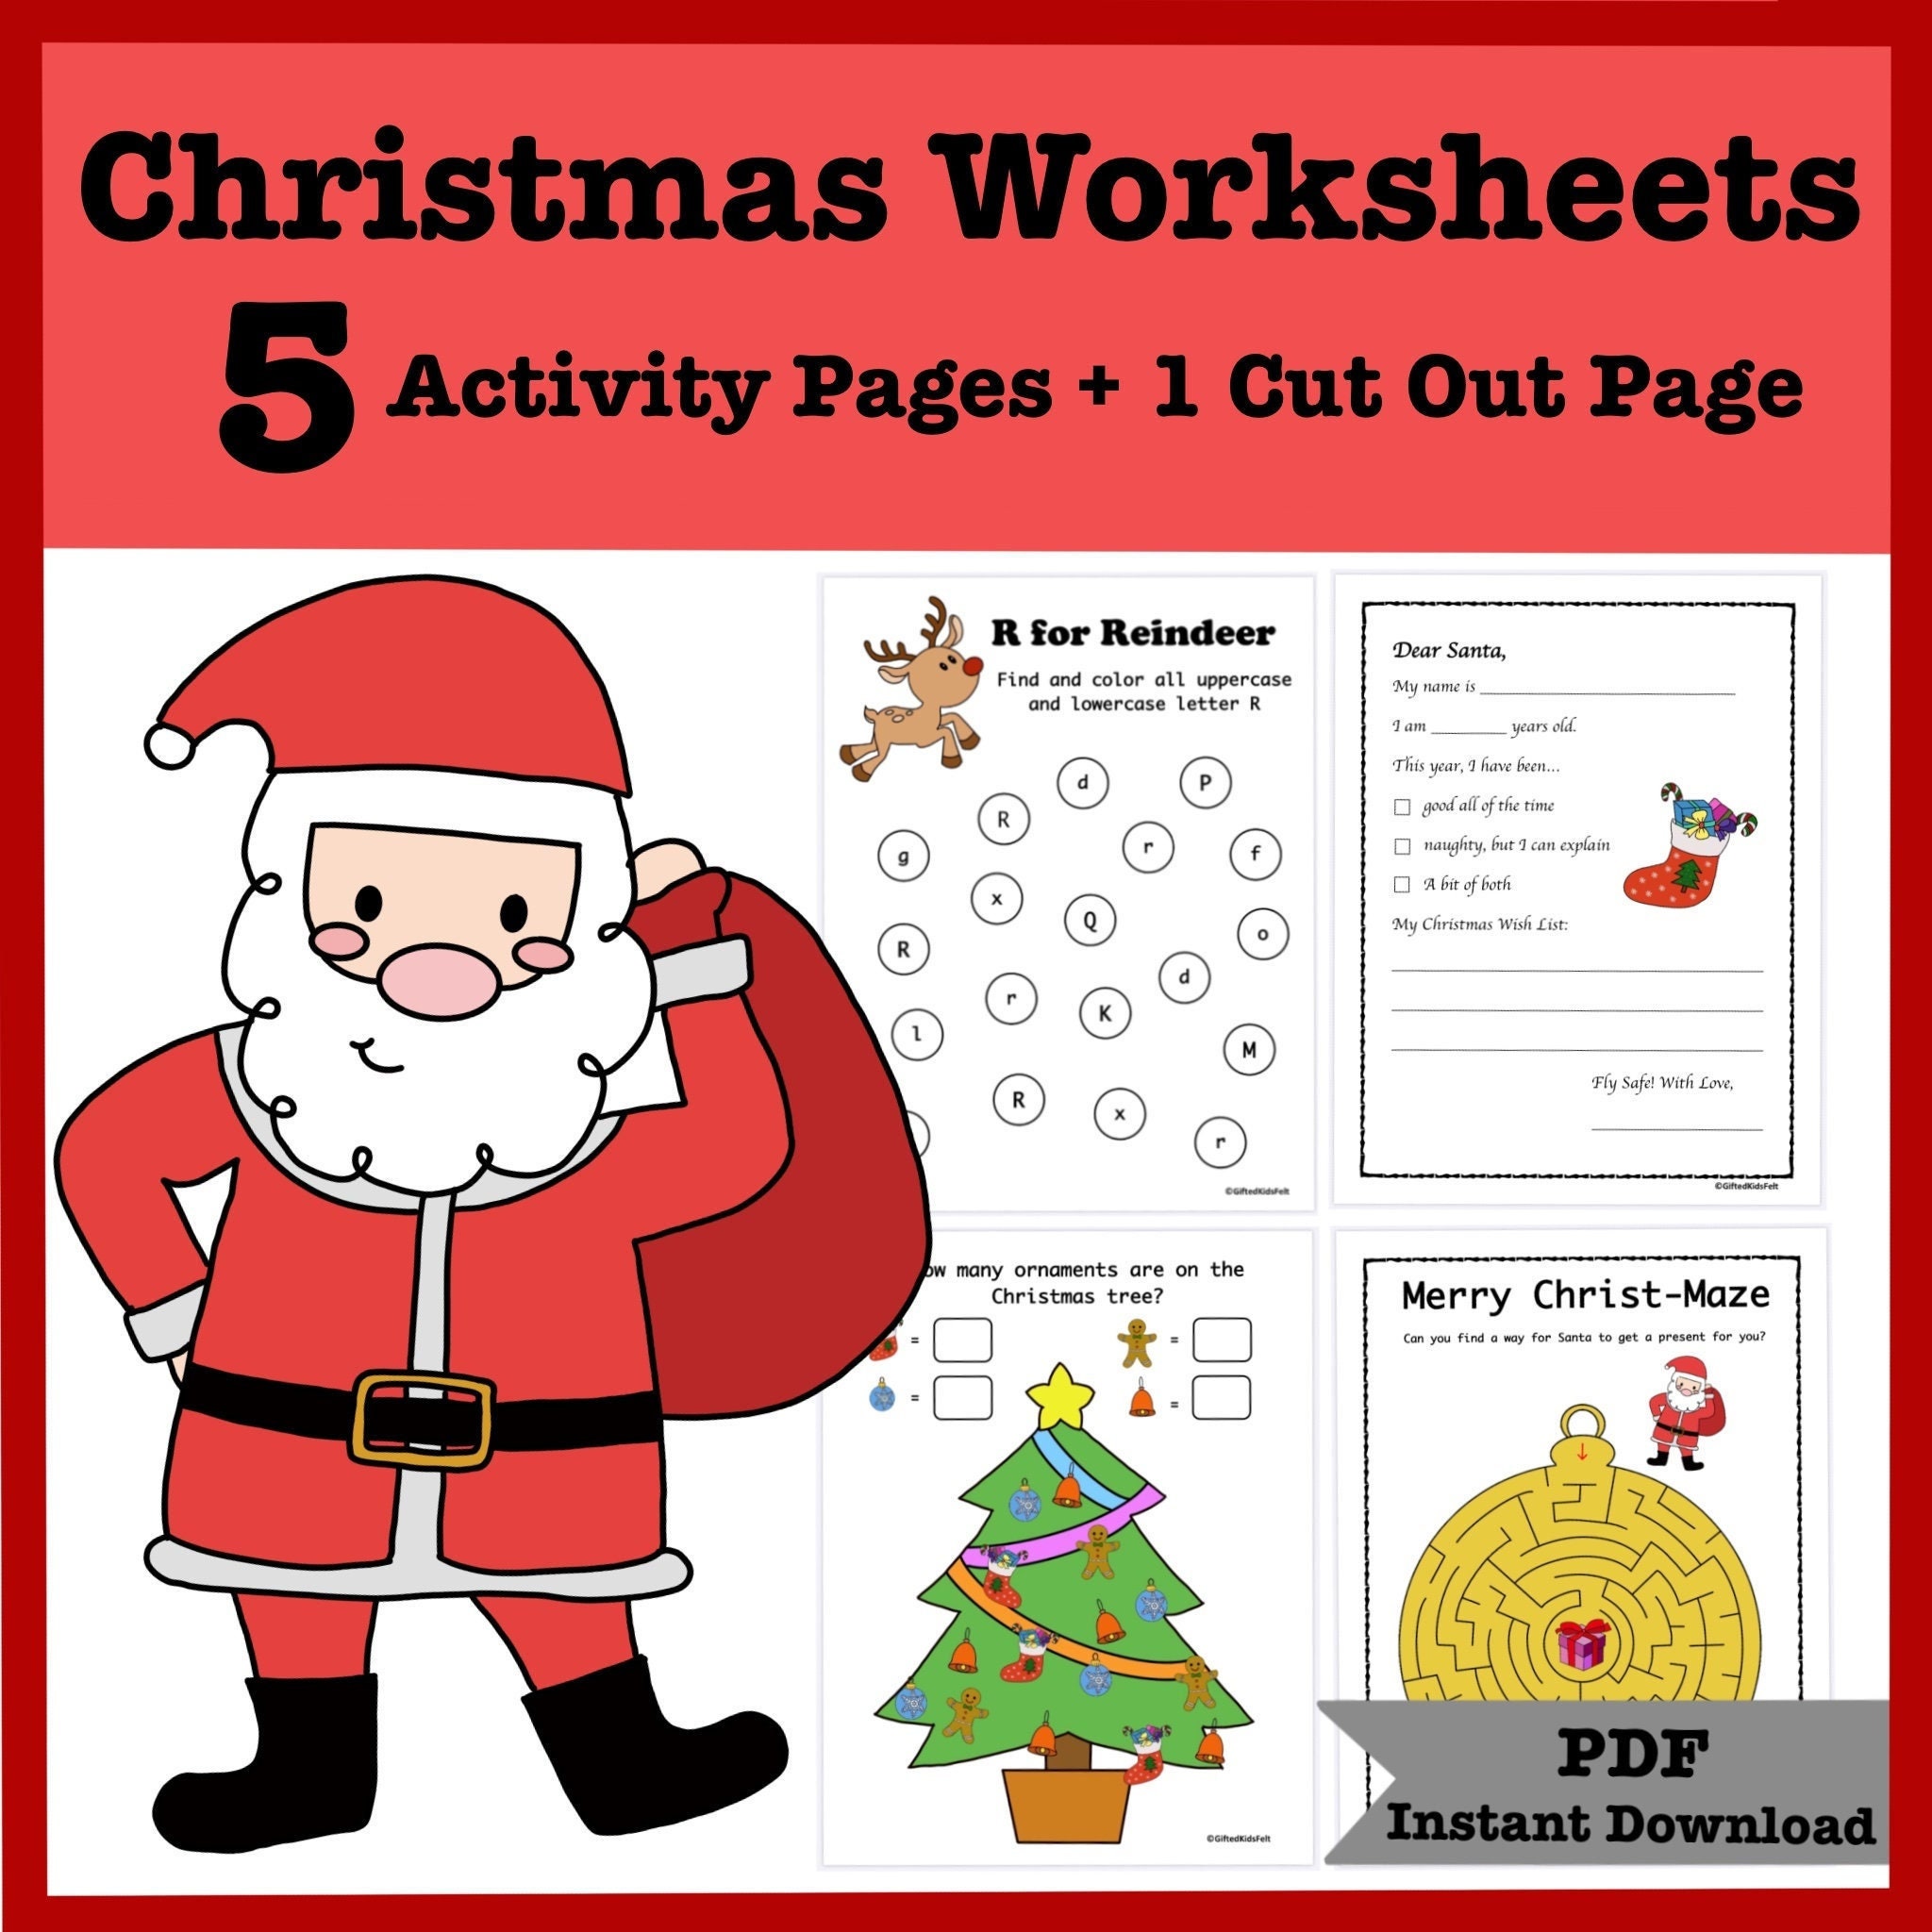 printable-pdf-christmas-activity-sheets-for-kid-children-daycare-childcare-school